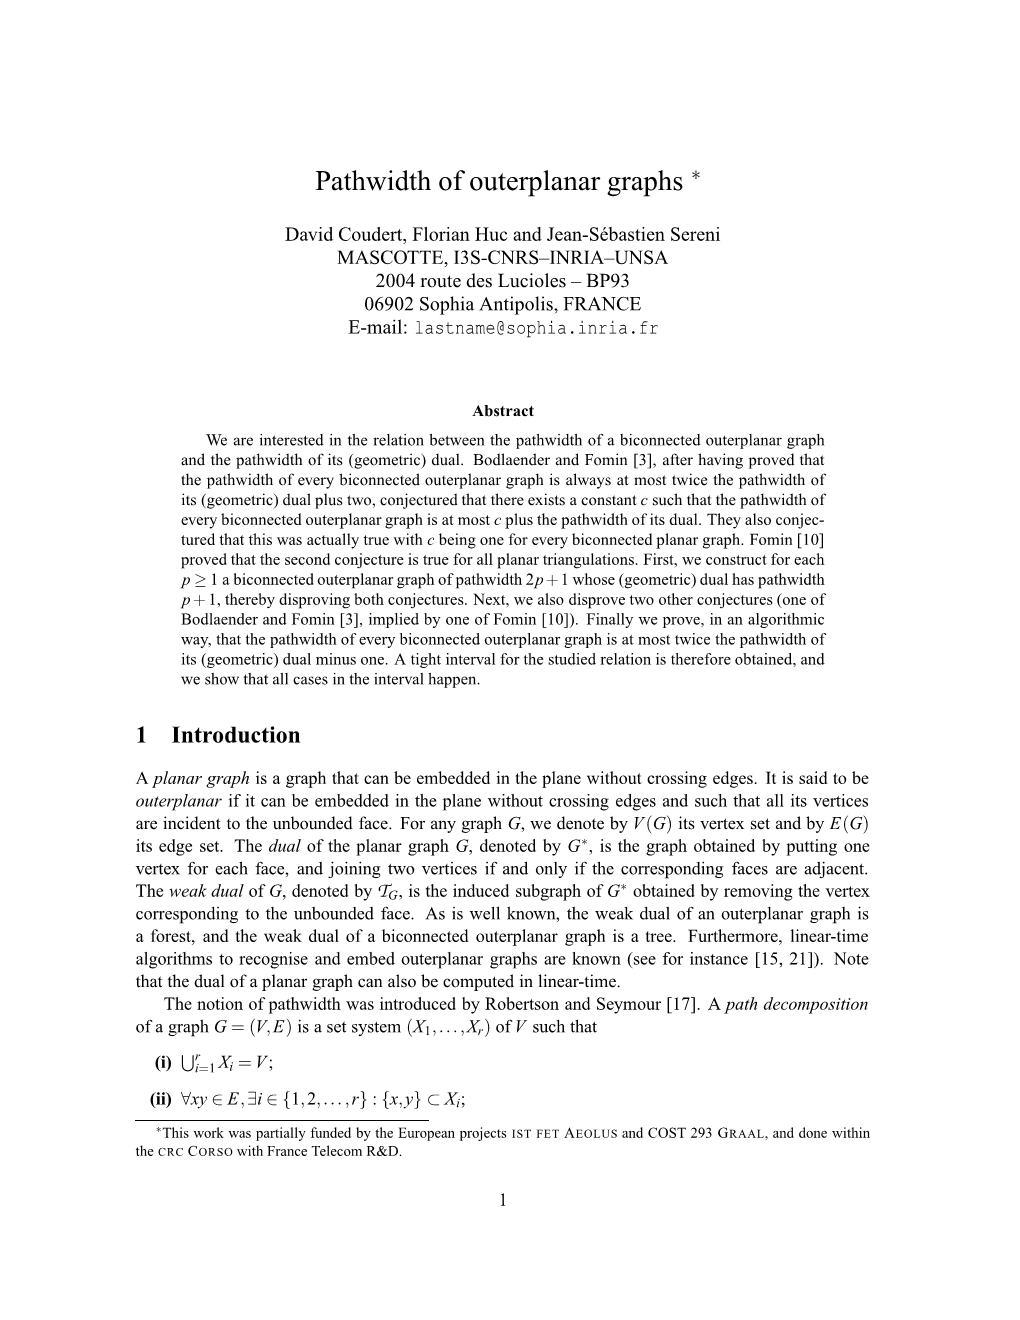 Pathwidth of Outerplanar Graphs ∗